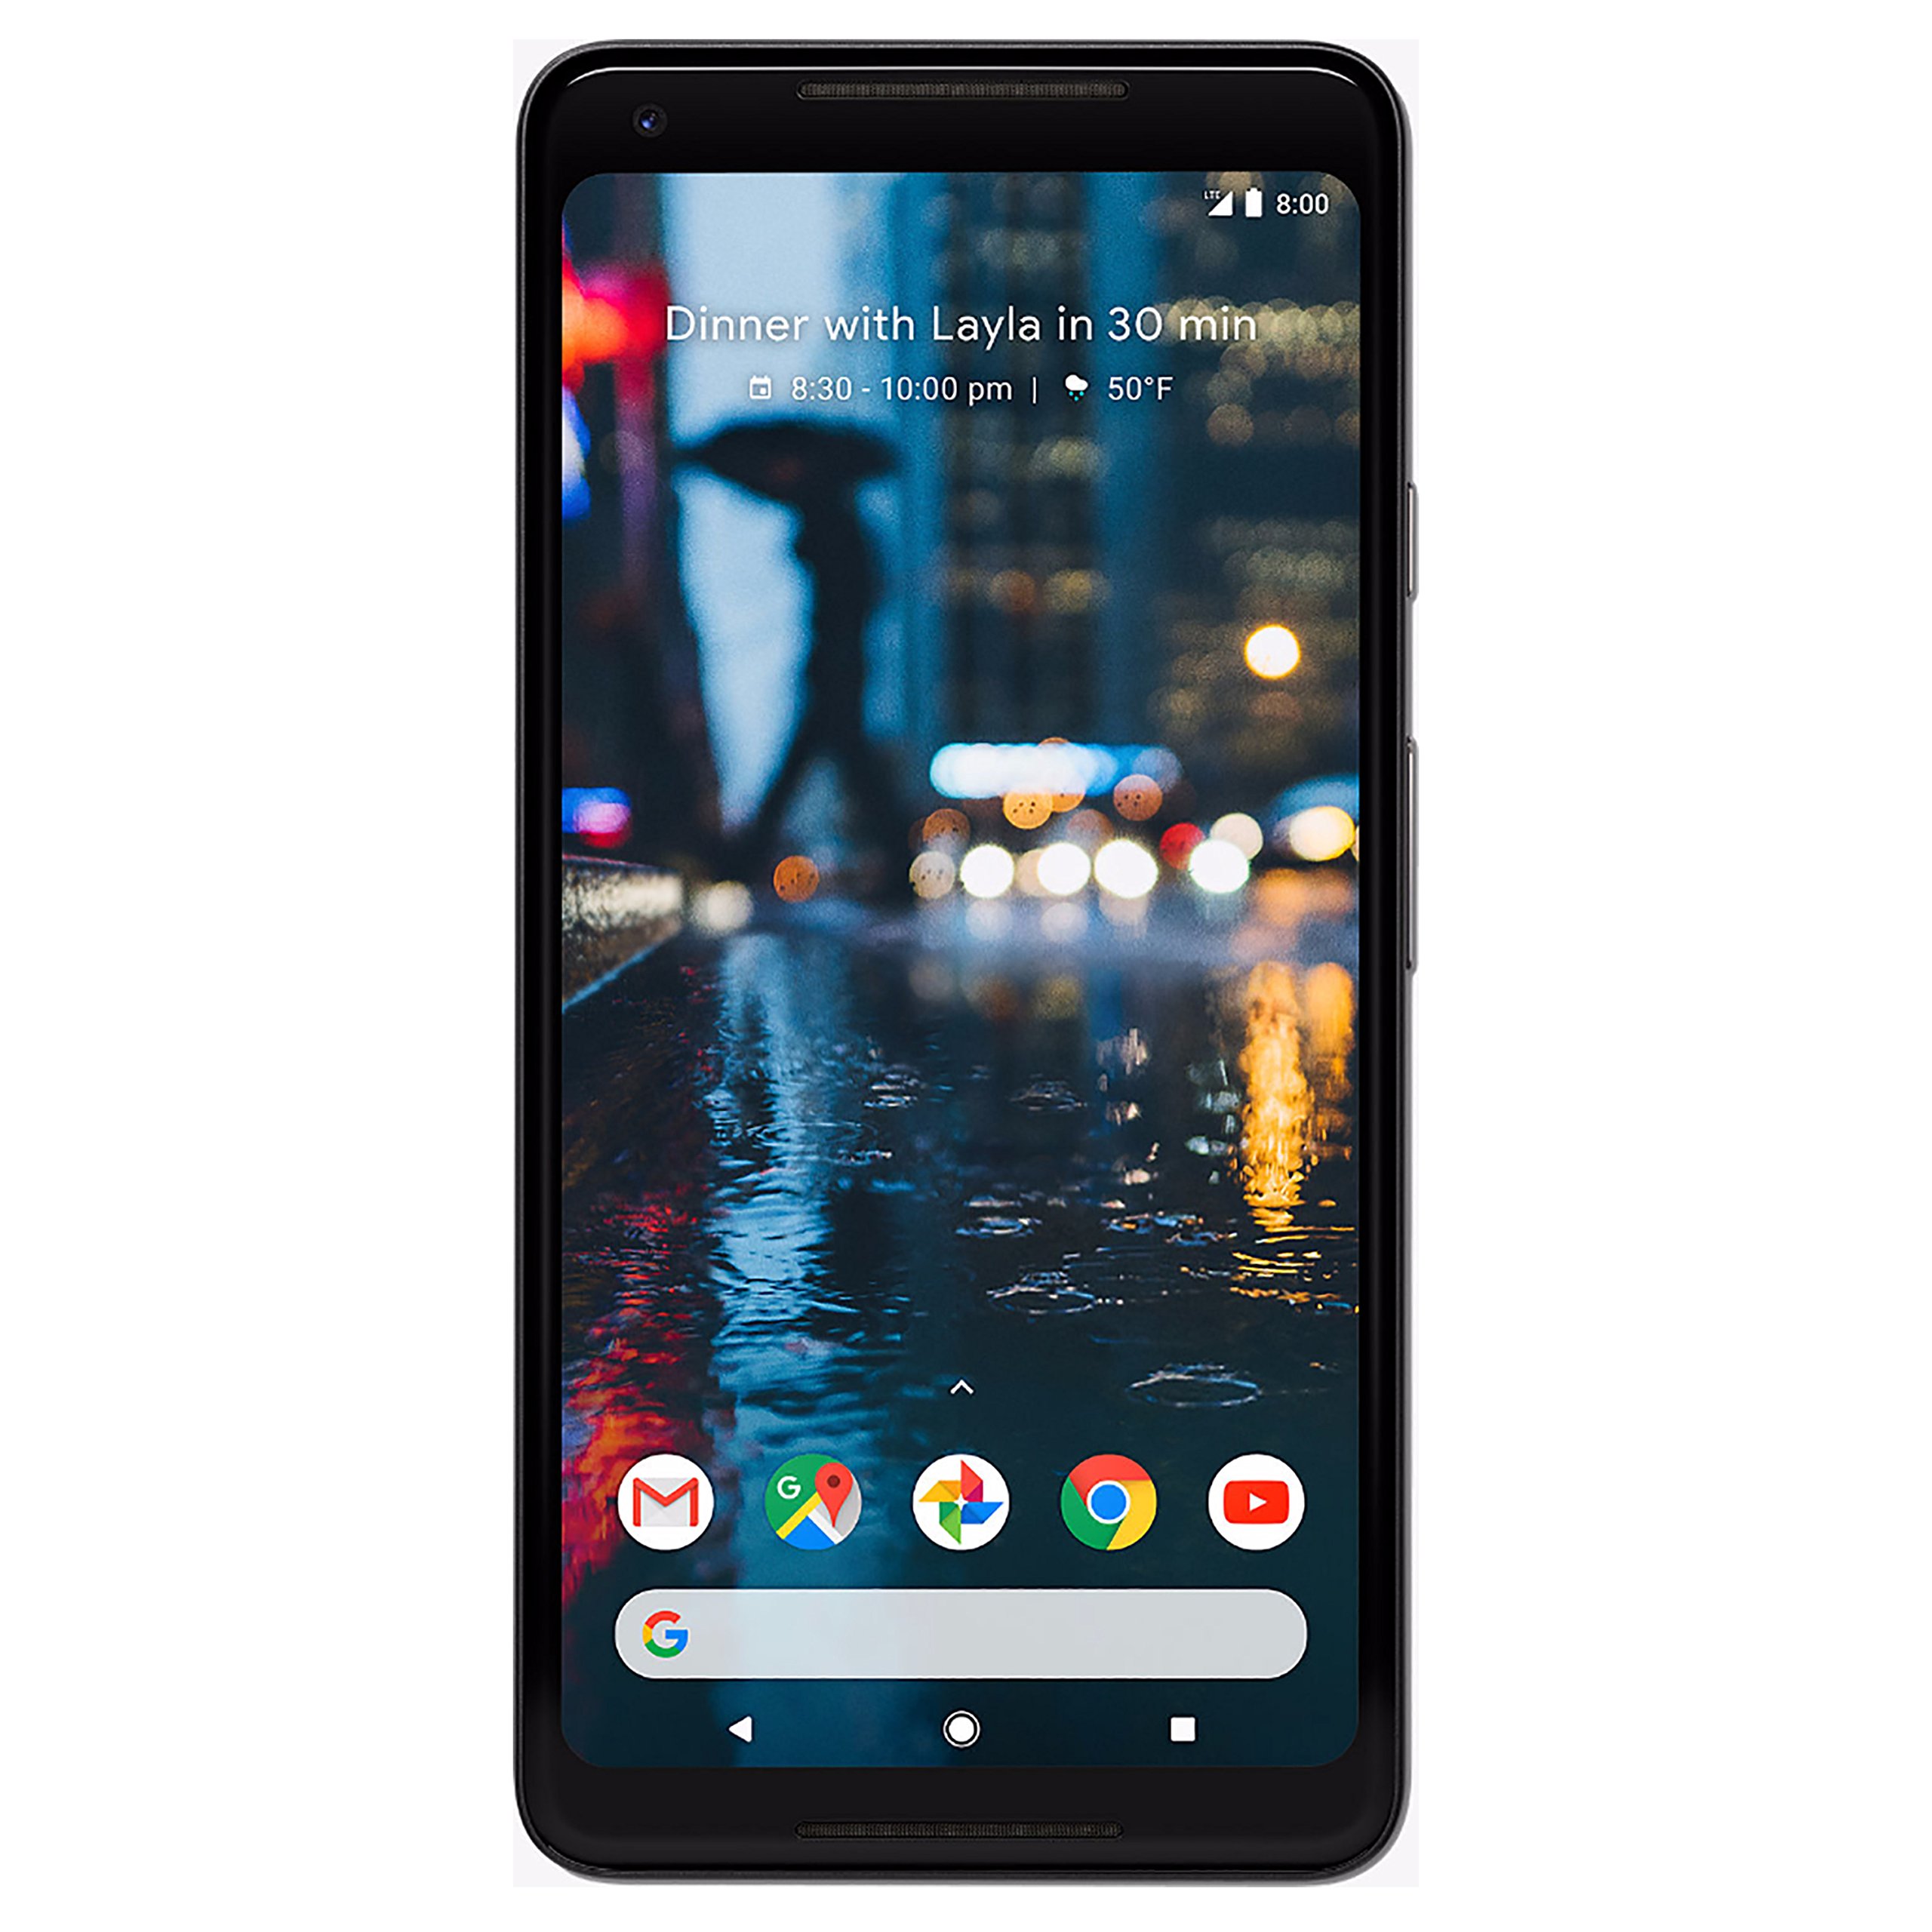 Refurbished Google Pixel 2XL 128GB comes without box and accessories